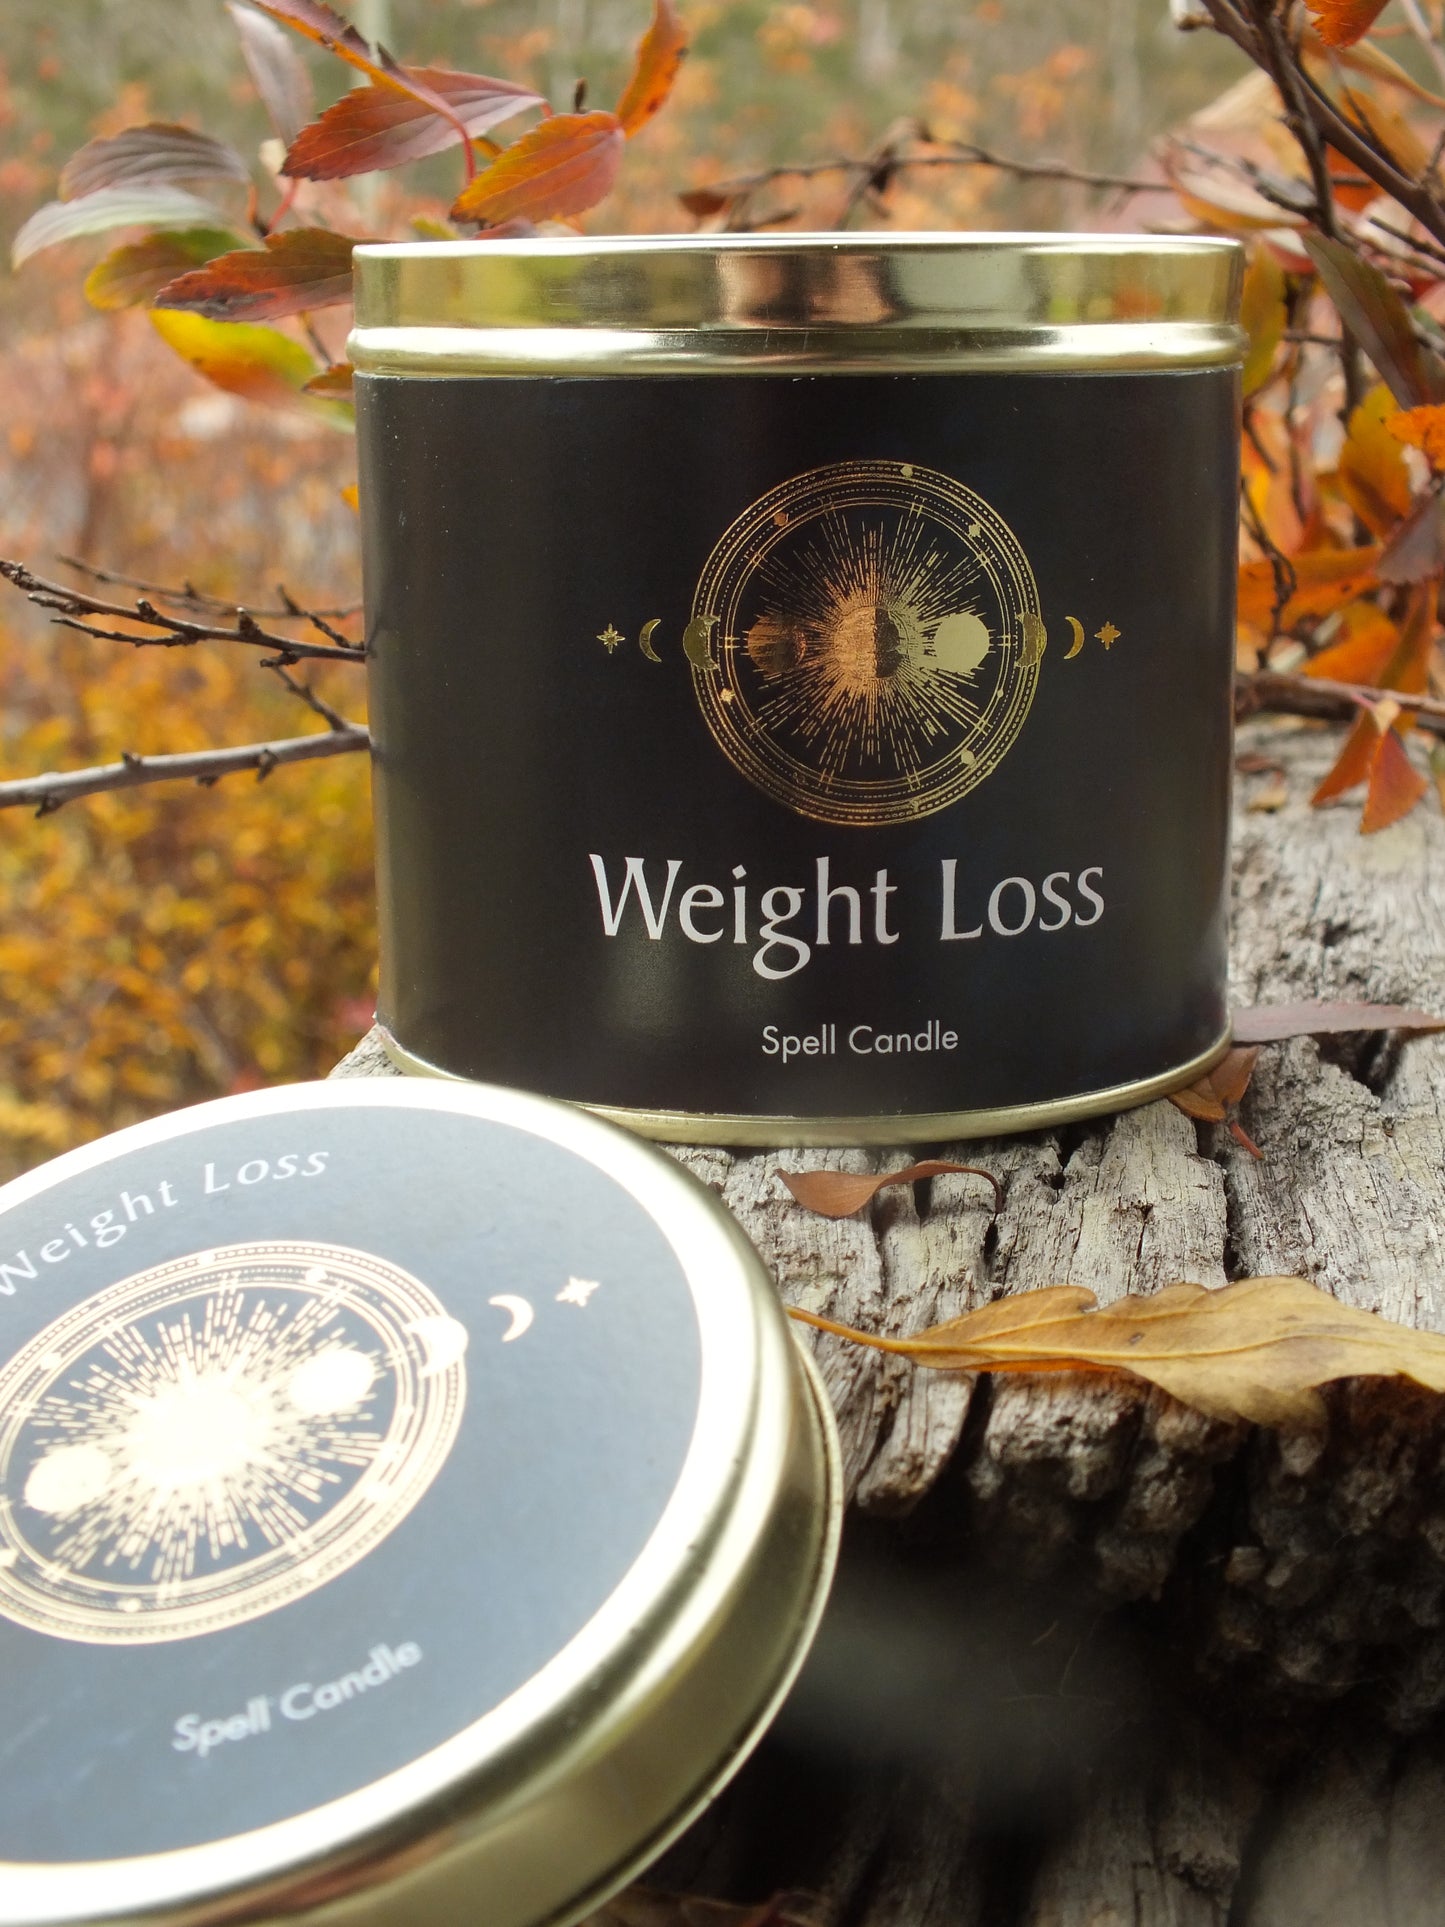 Magic Spell Candle - Weight Loss